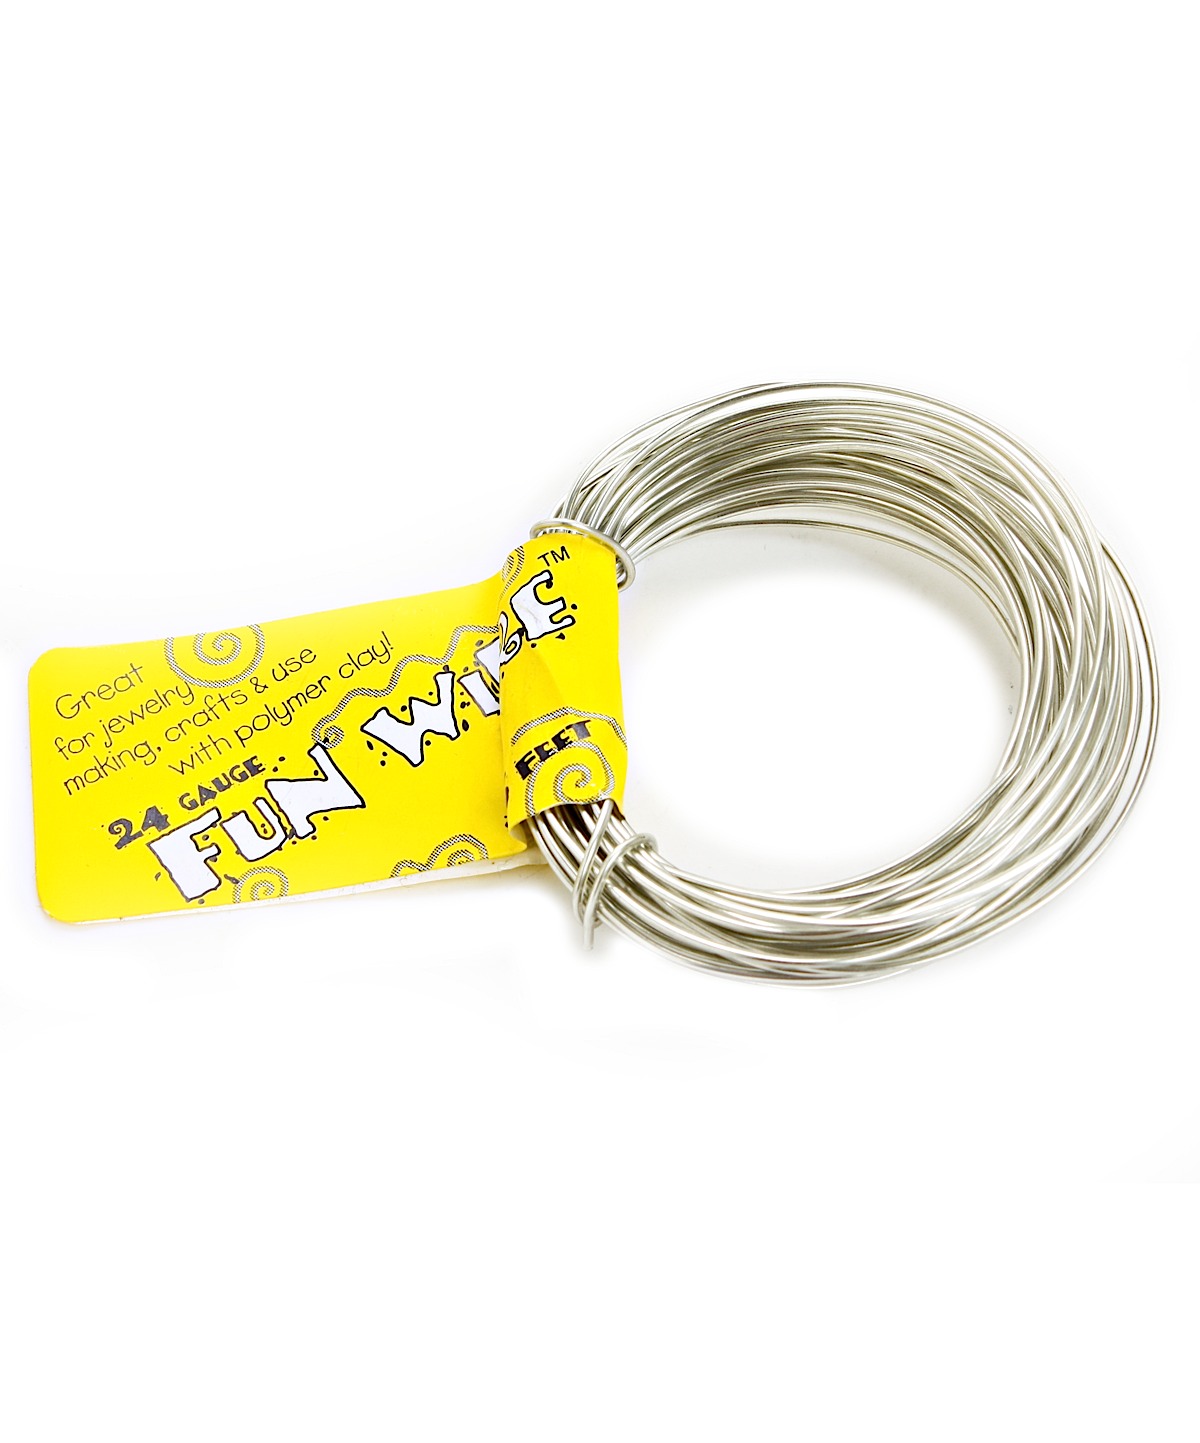 Fun Wire 24 Gauge Icy Silver 15 Ft.